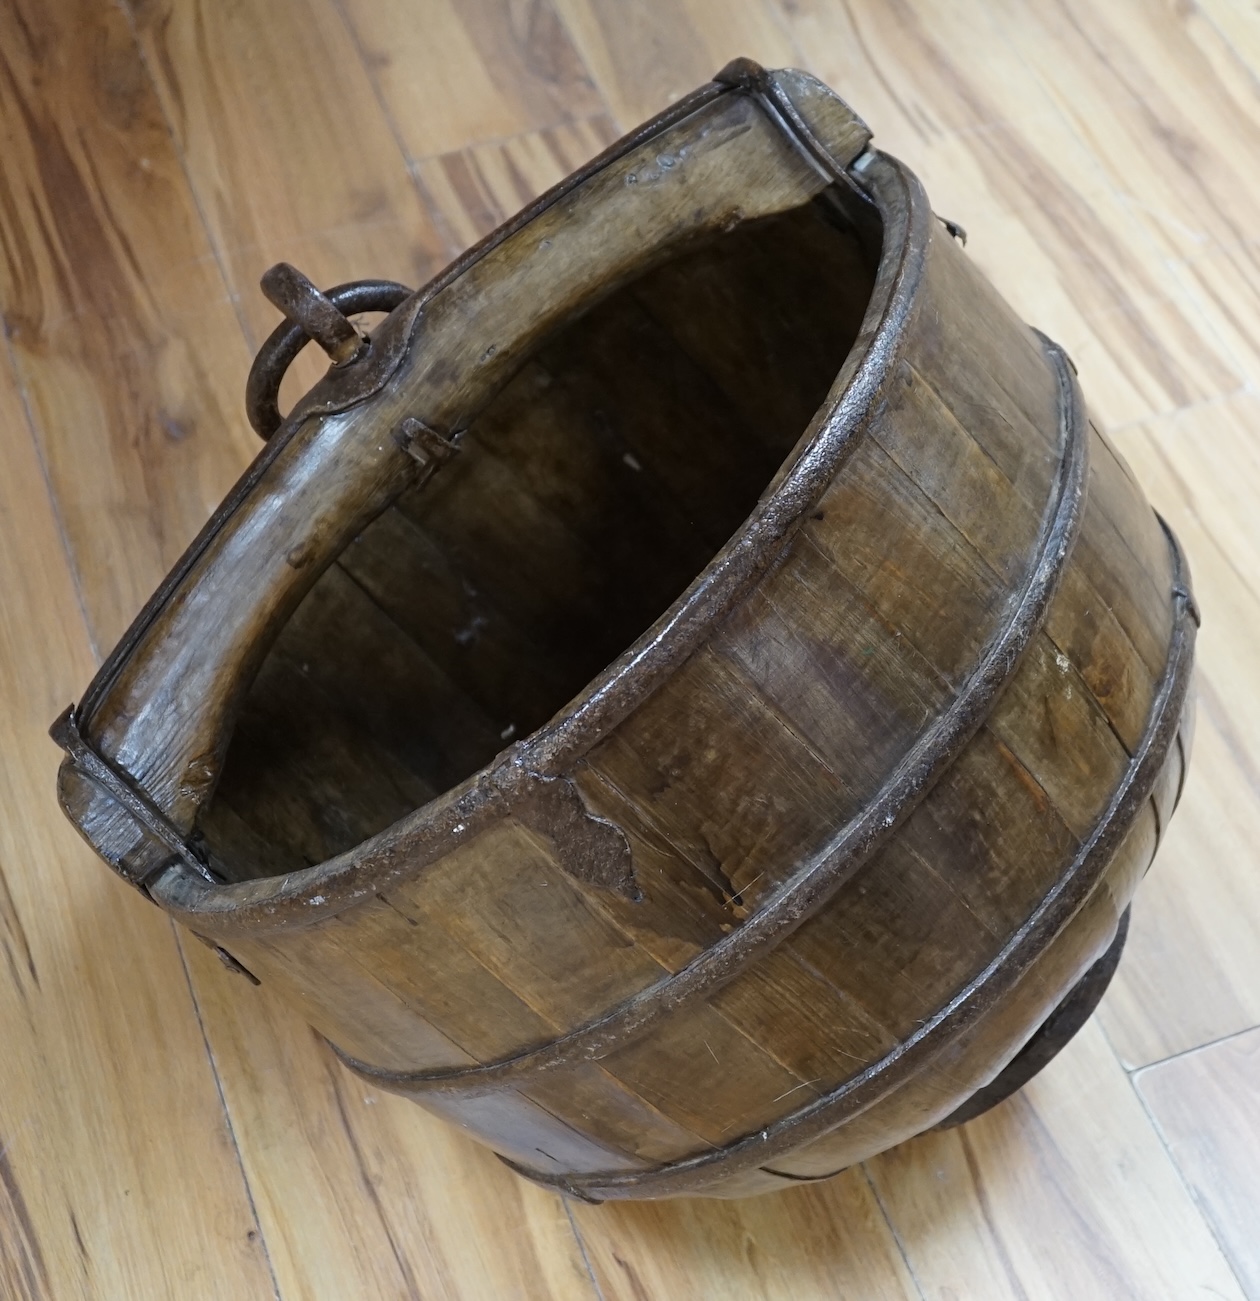 A Chinese coopered well bucket, 60cm high. Condition- fair to good